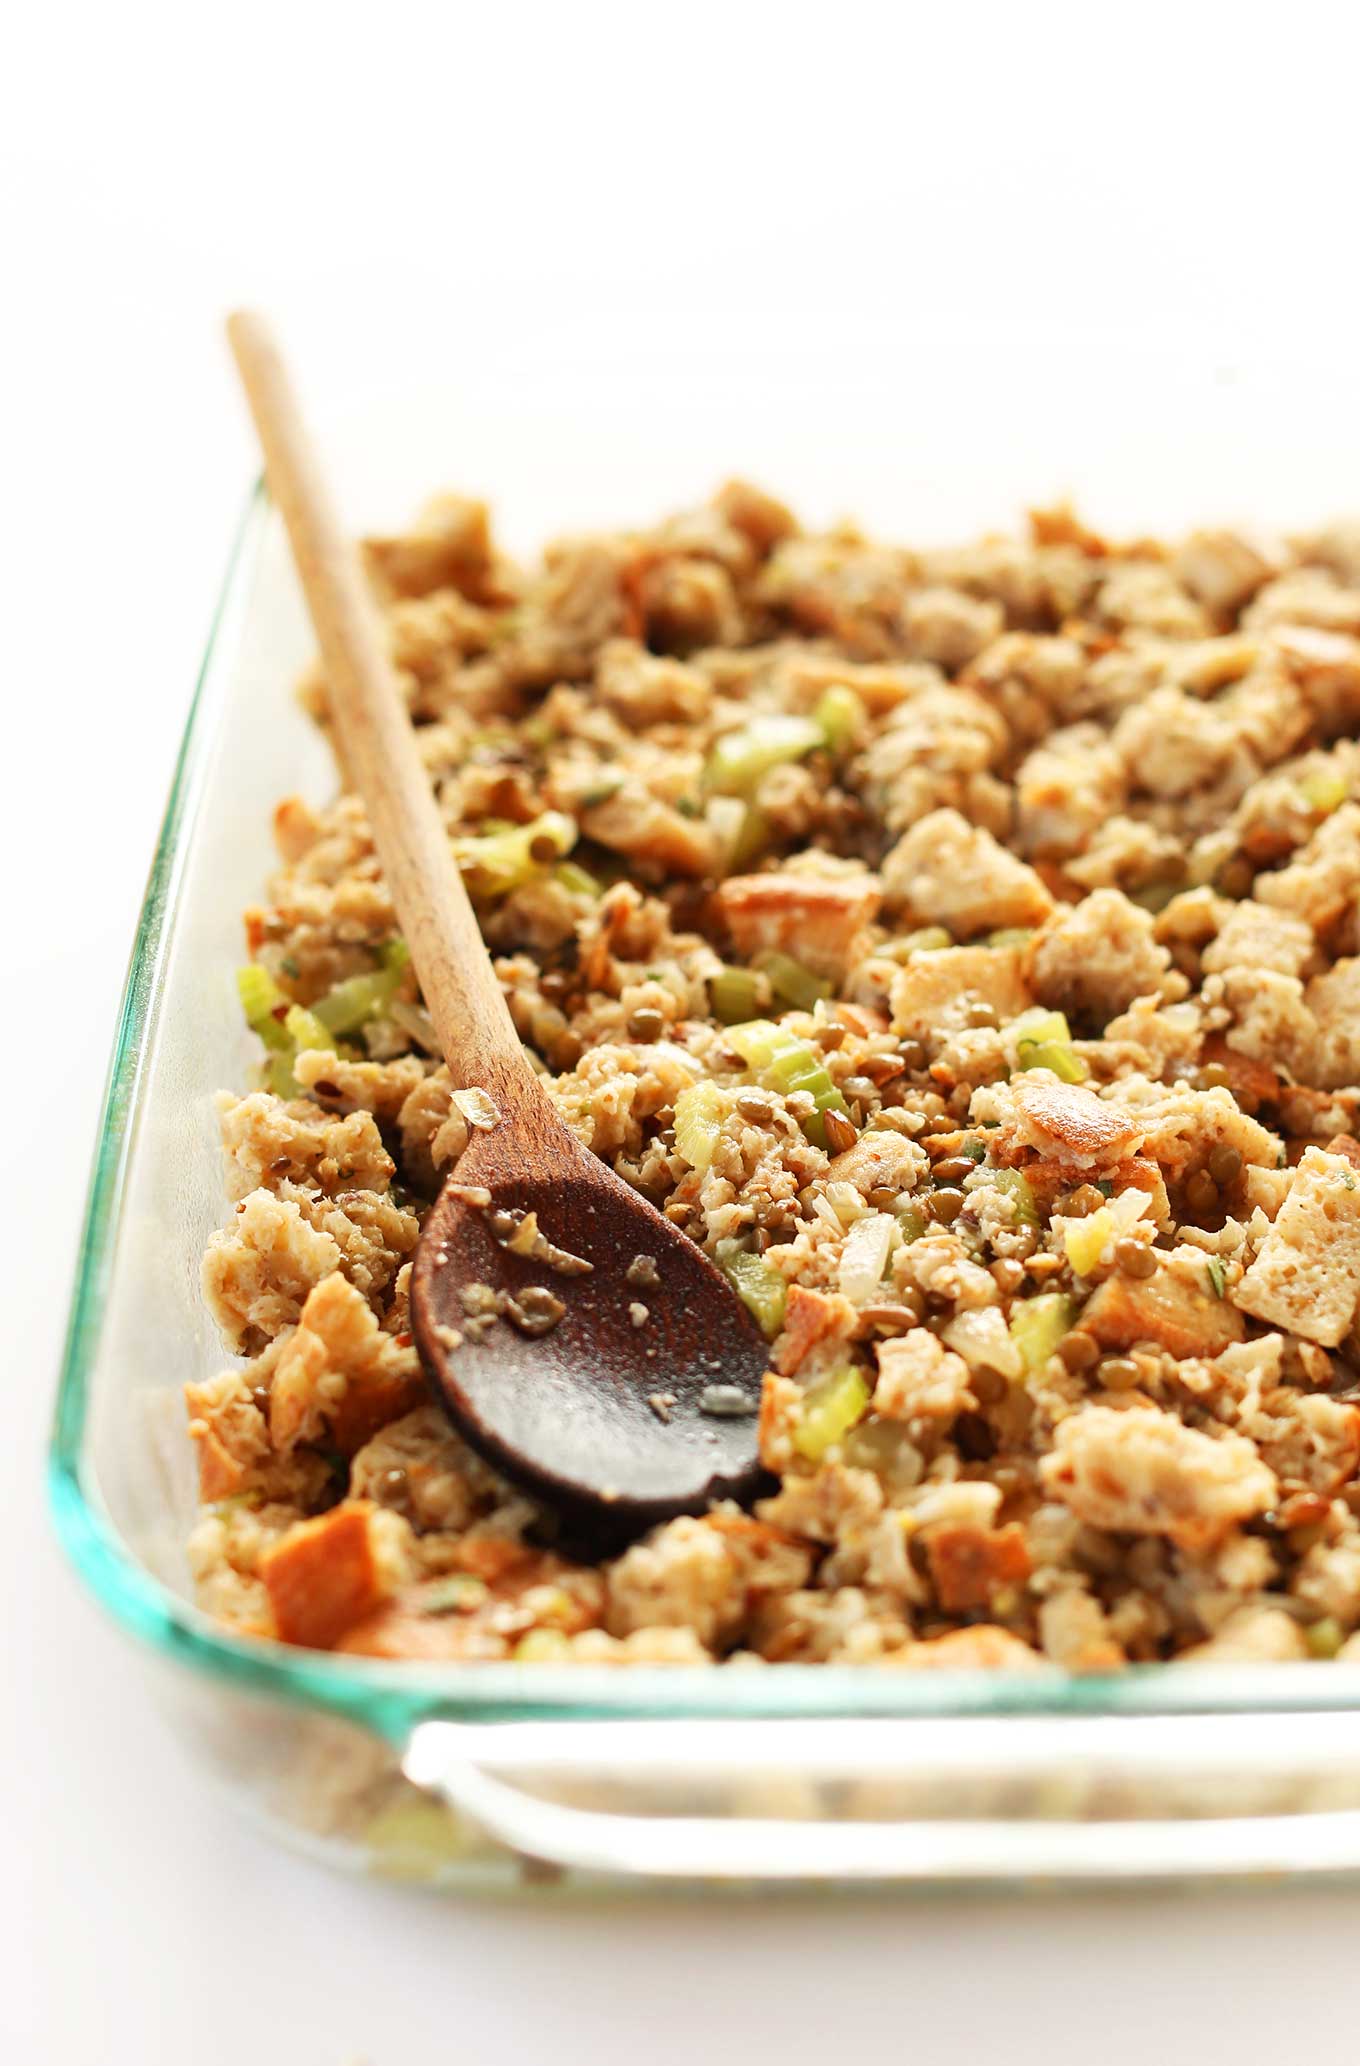 Glass baking dish filled with our simple vegan stuffing recipe